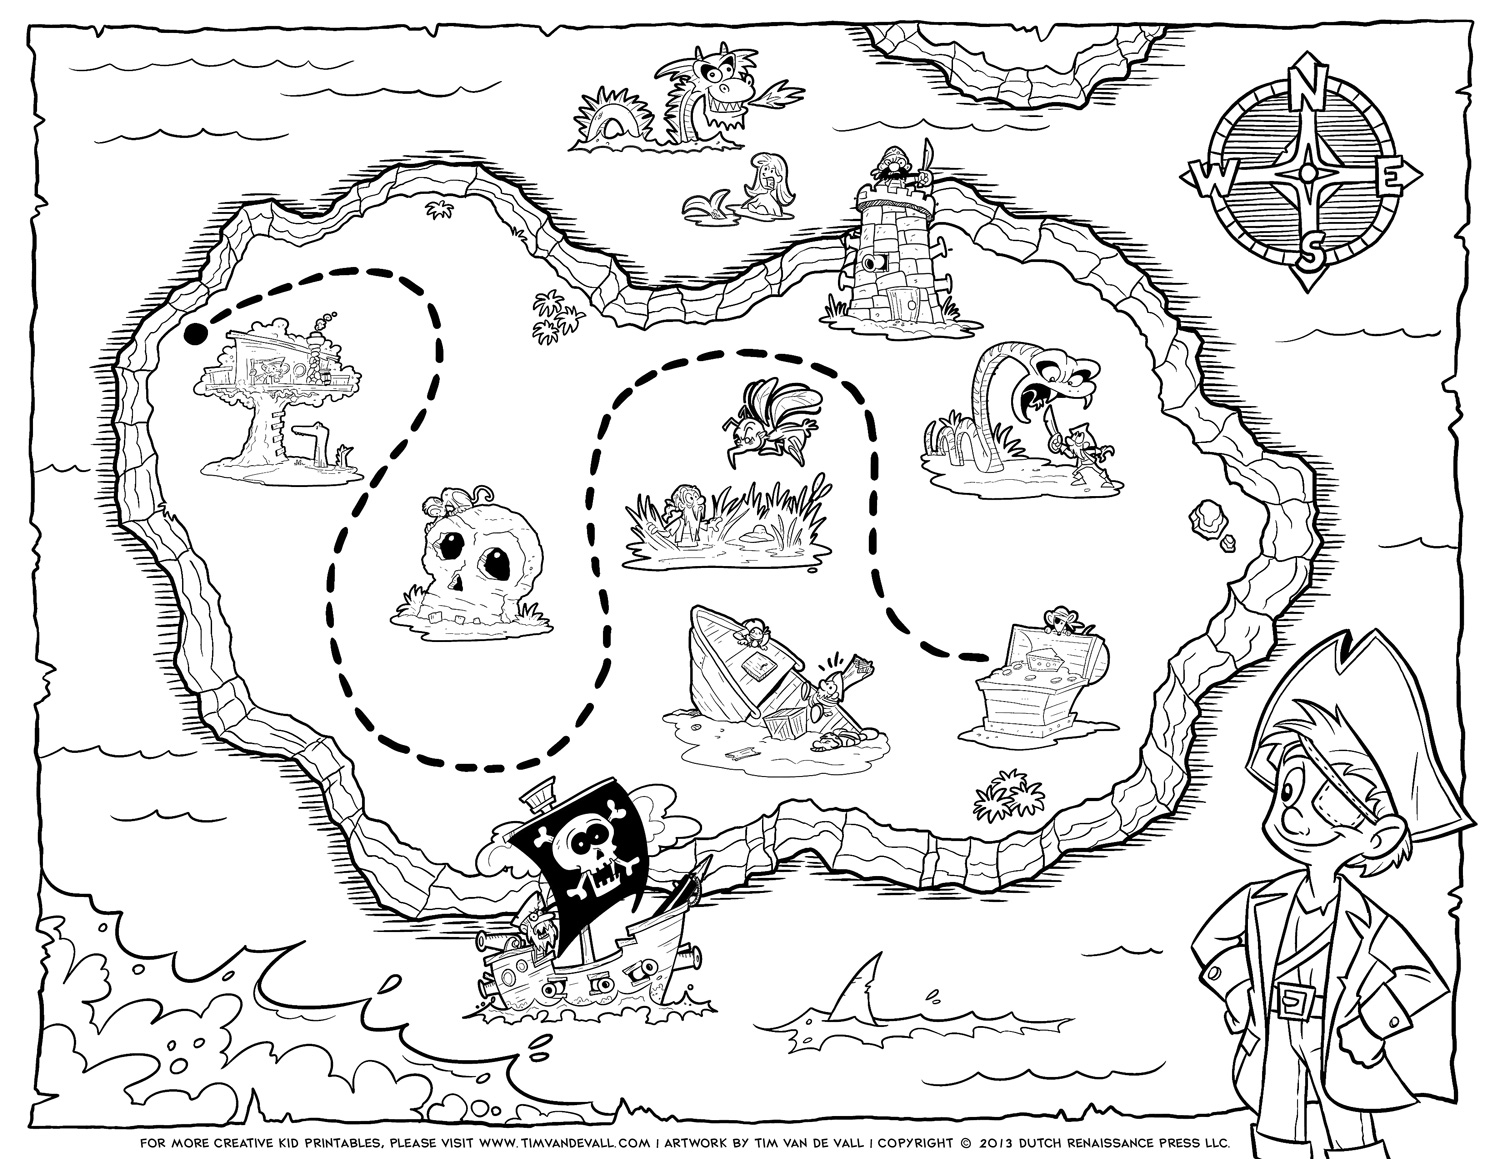 neverland map coloring pages - photo #16